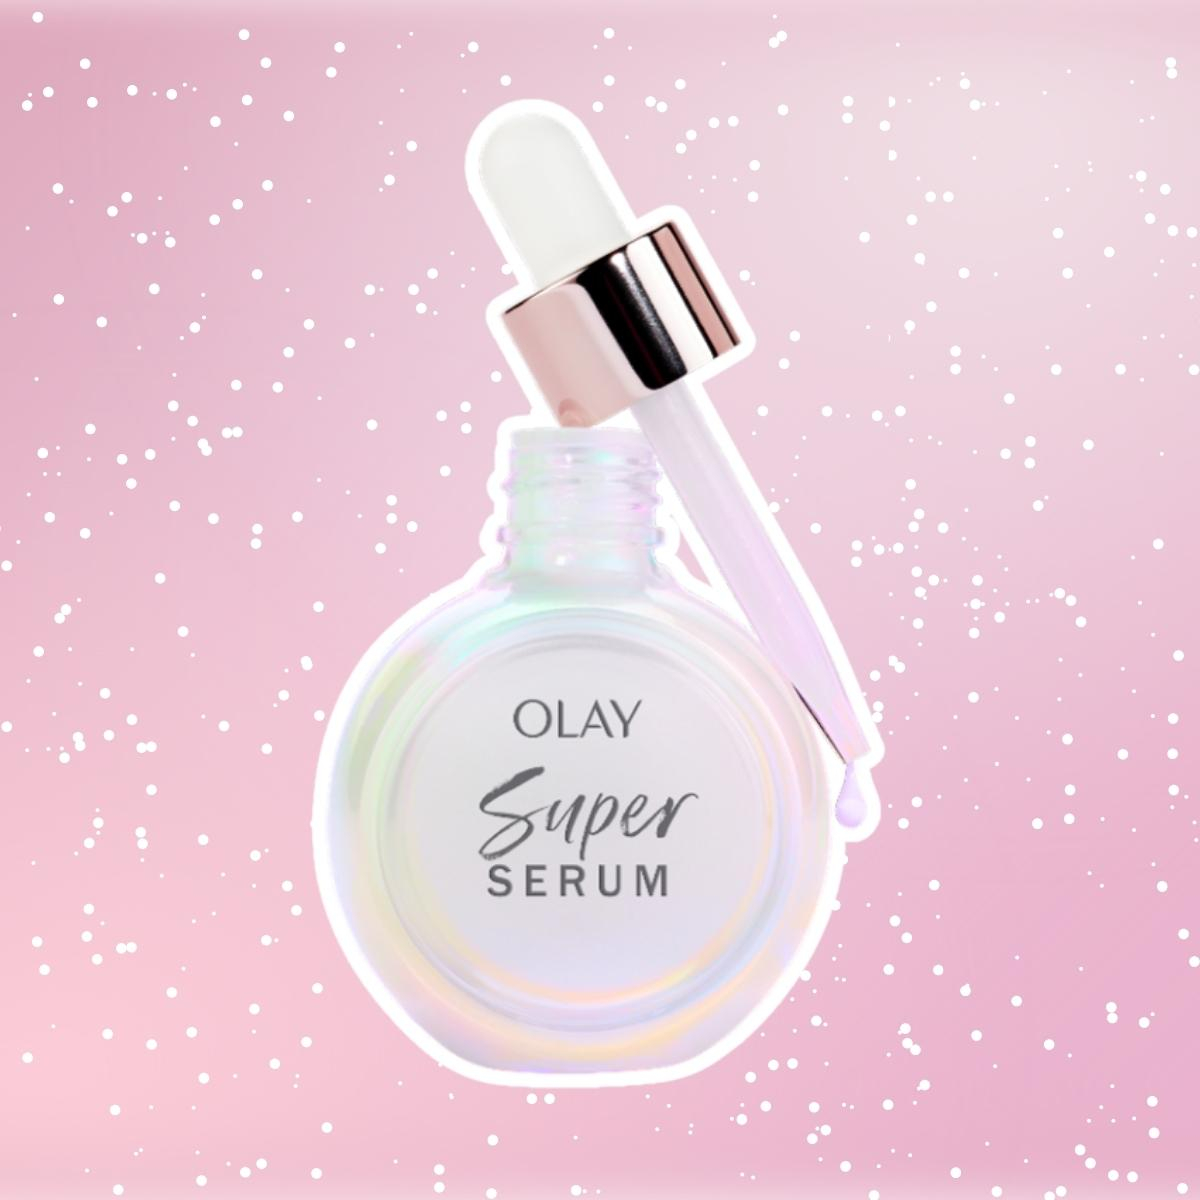 Why Olay’s Super Serum Is My Dream Skin-Care Product